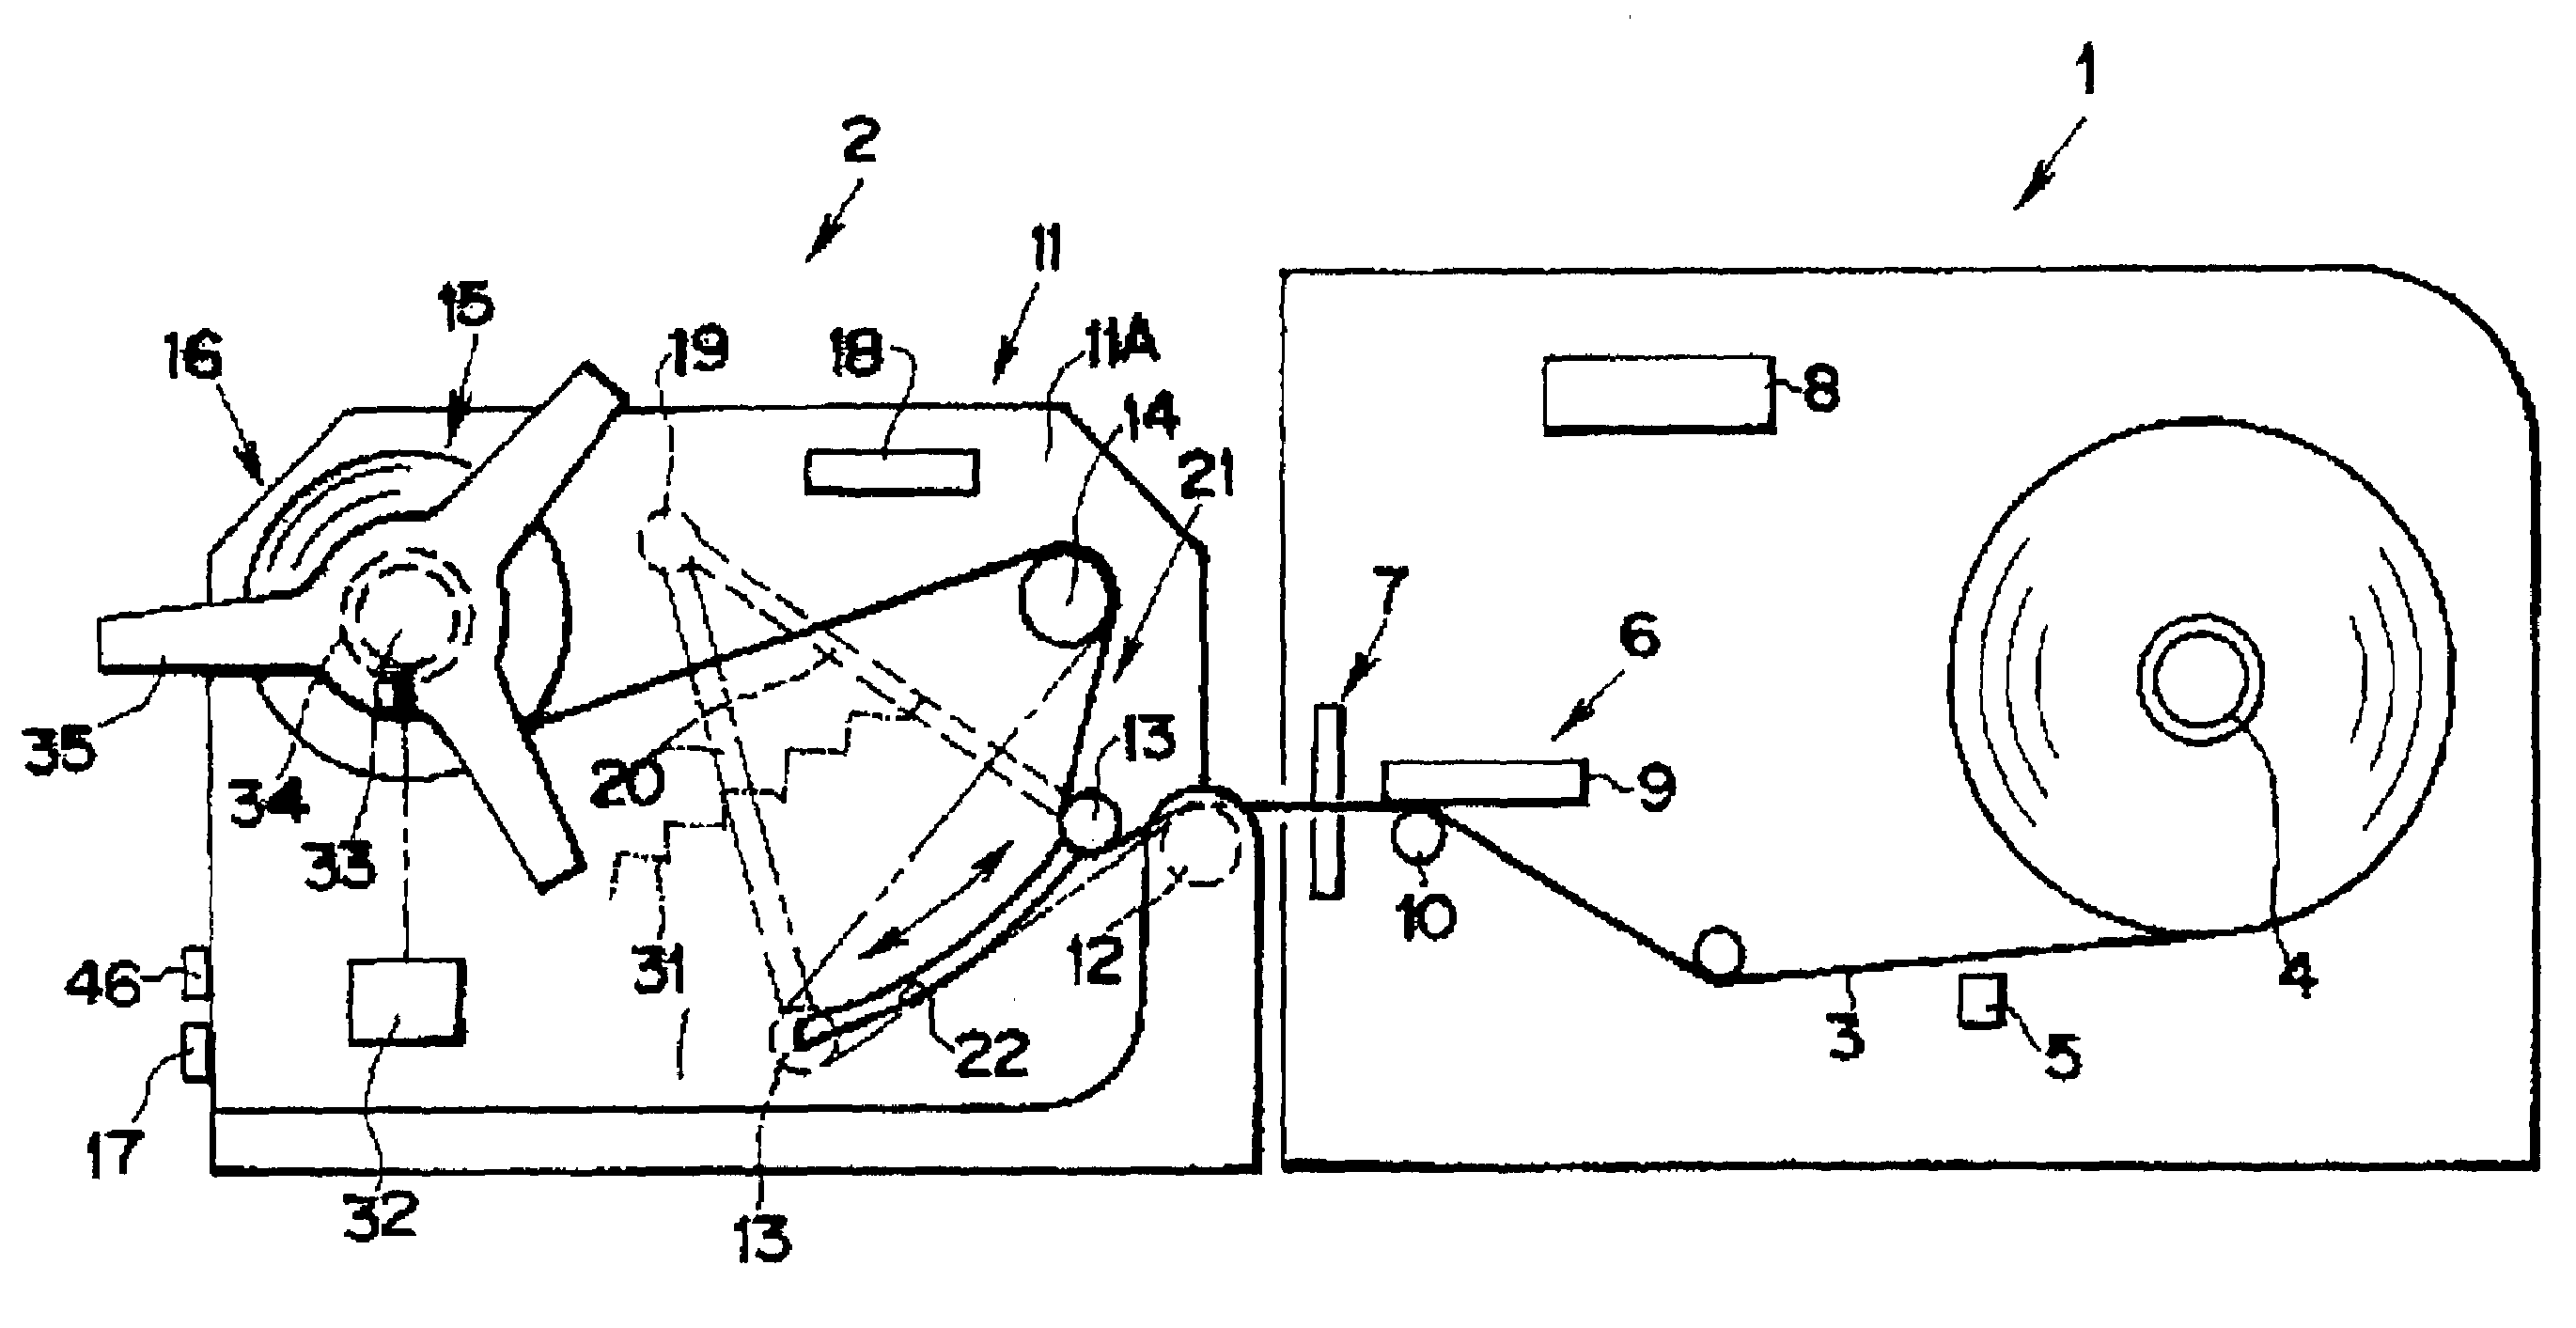 Printing paper winding device